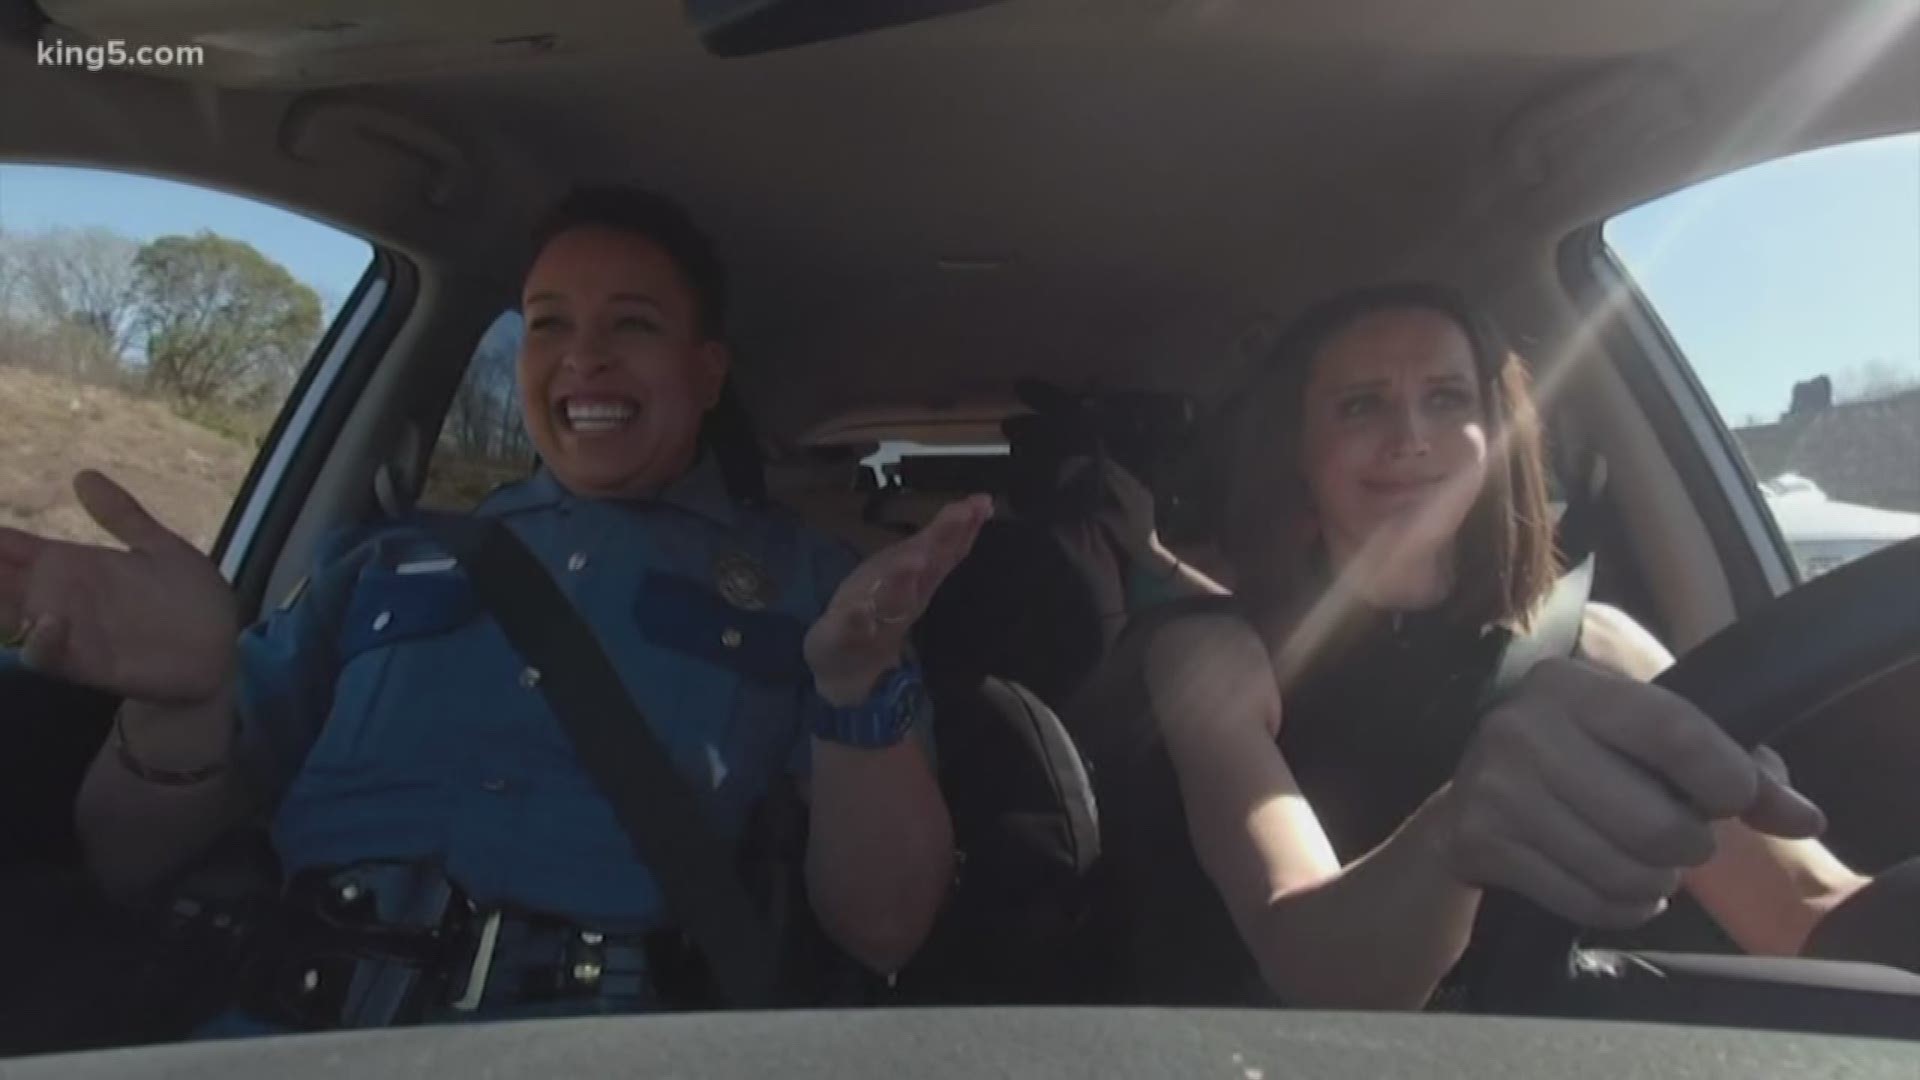 When it comes to driving, there are the rules of the road, and the rules of being polite. Kaci Aitchison tackled both in another ride-along with a Washington State Patrol Trooper.